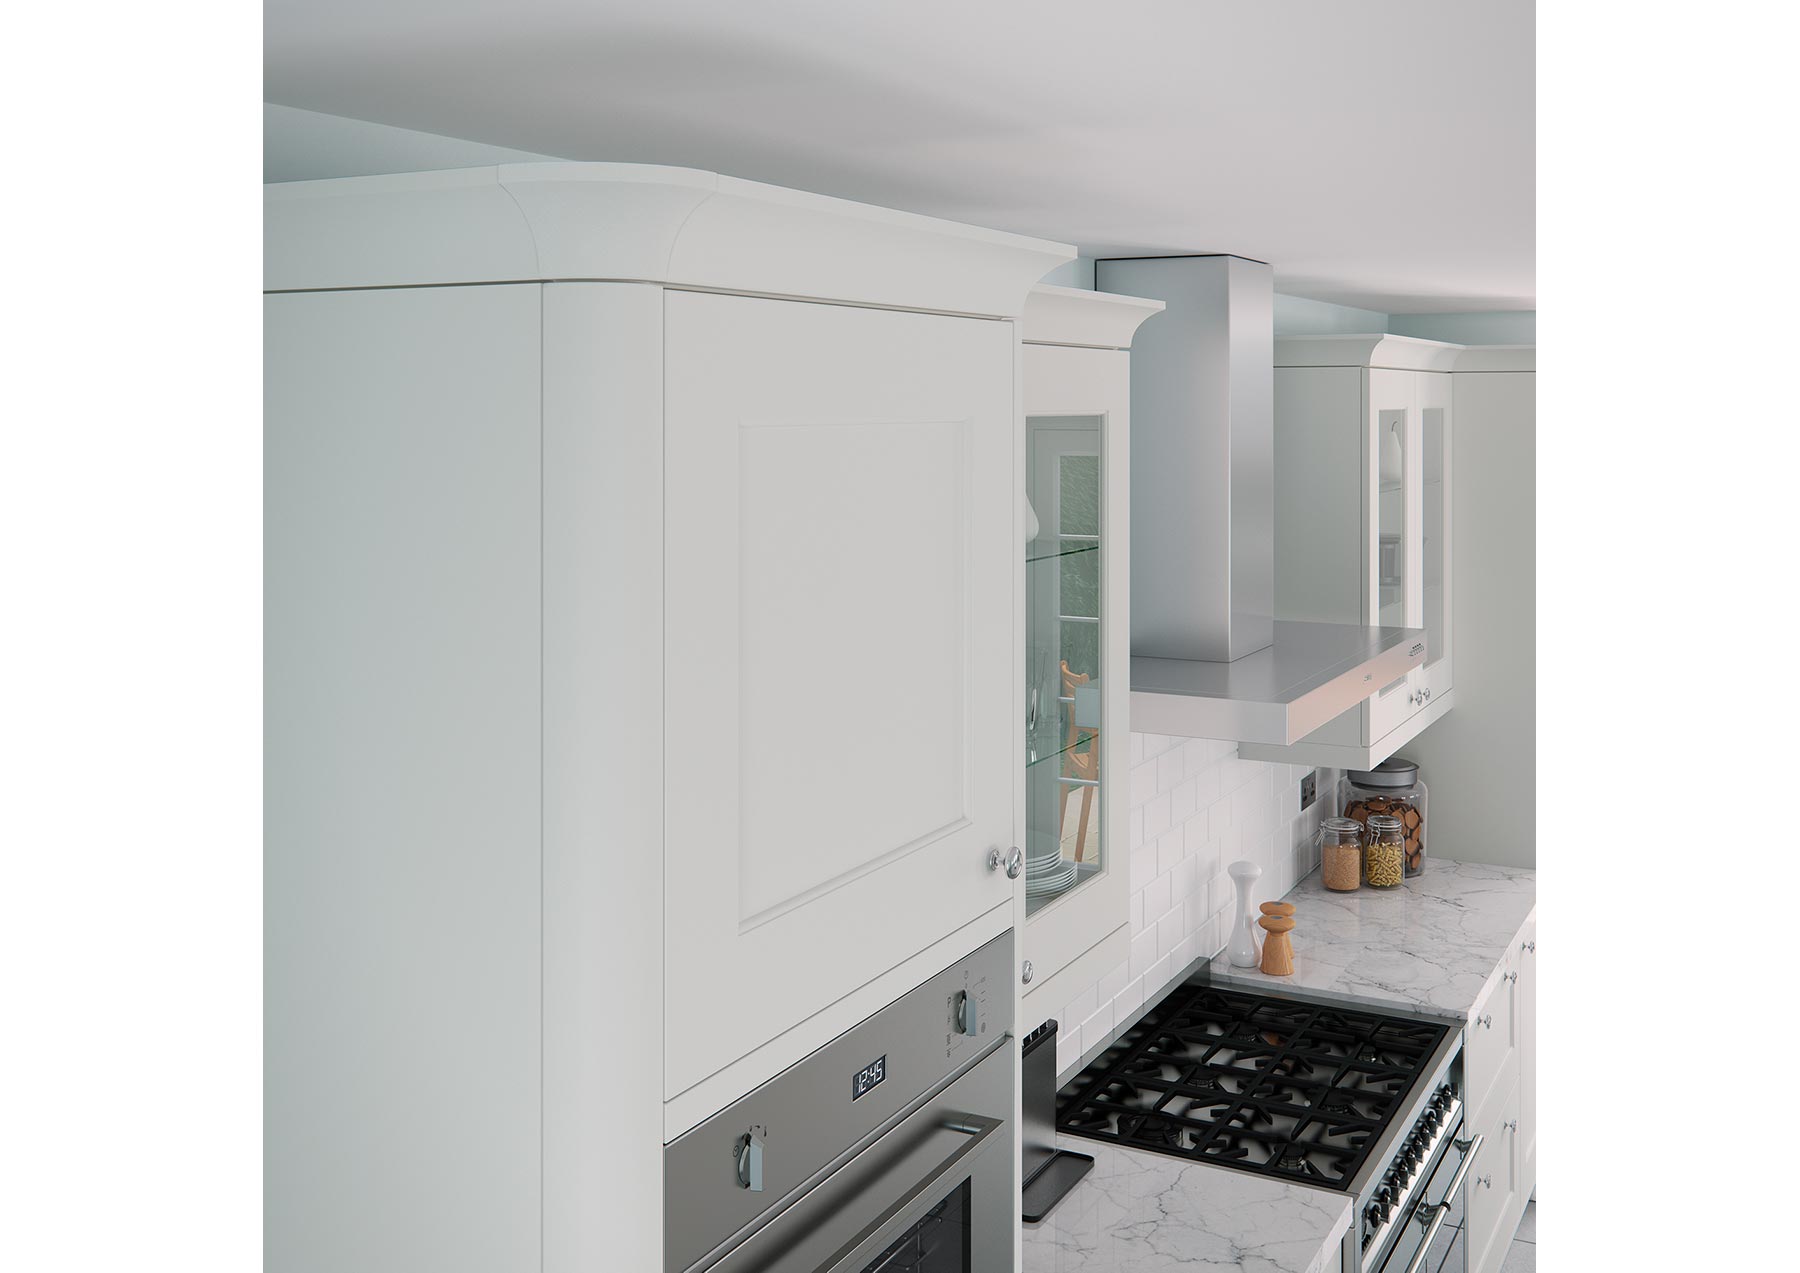 Light grey contemporary shaker style kitchen cabinet close-up